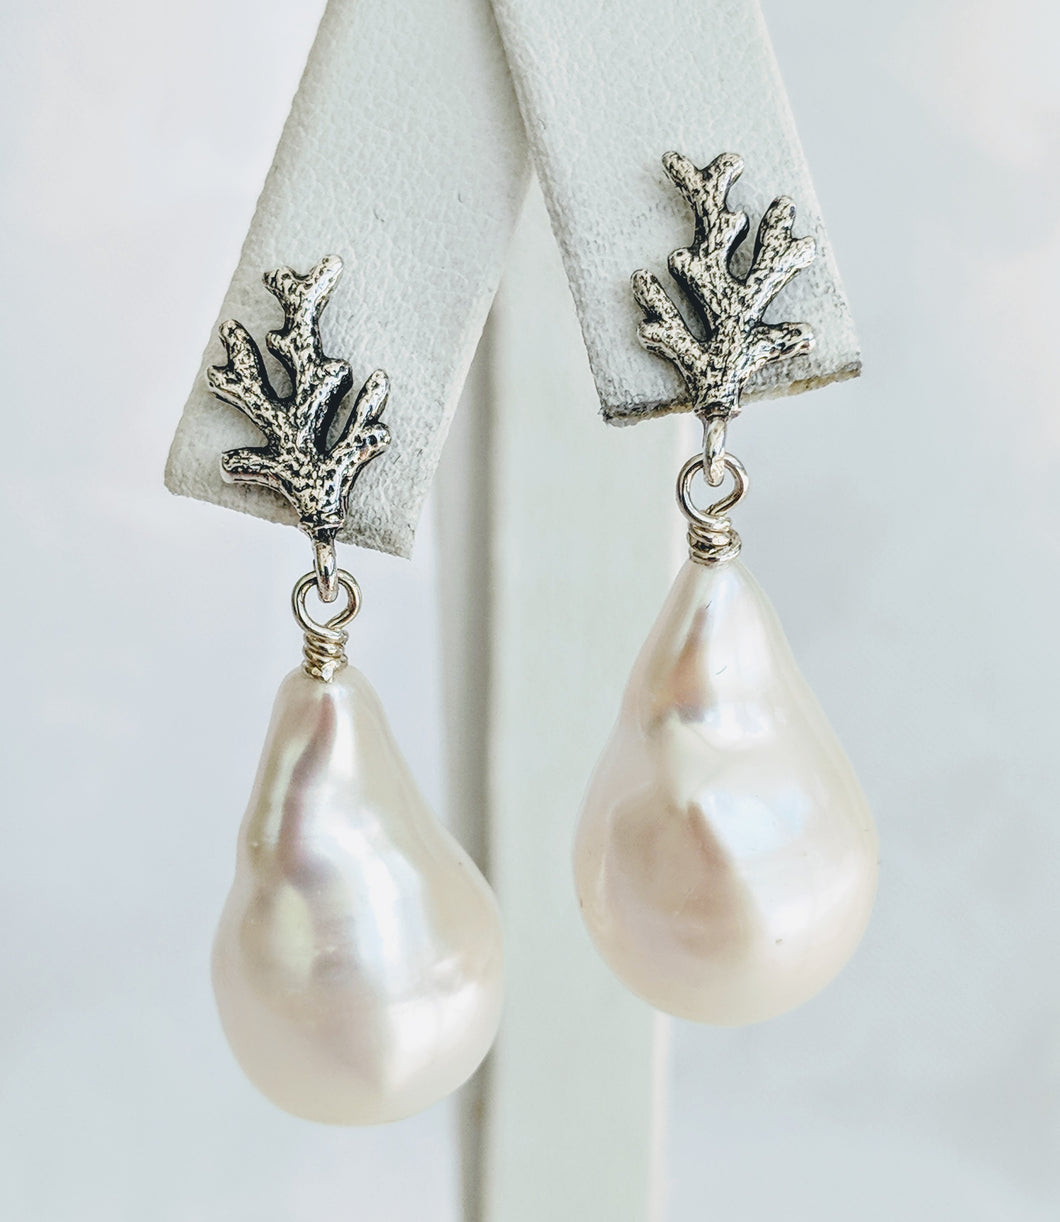 Baroque freshwater pearl earrings with Sterling silver coral branch detail